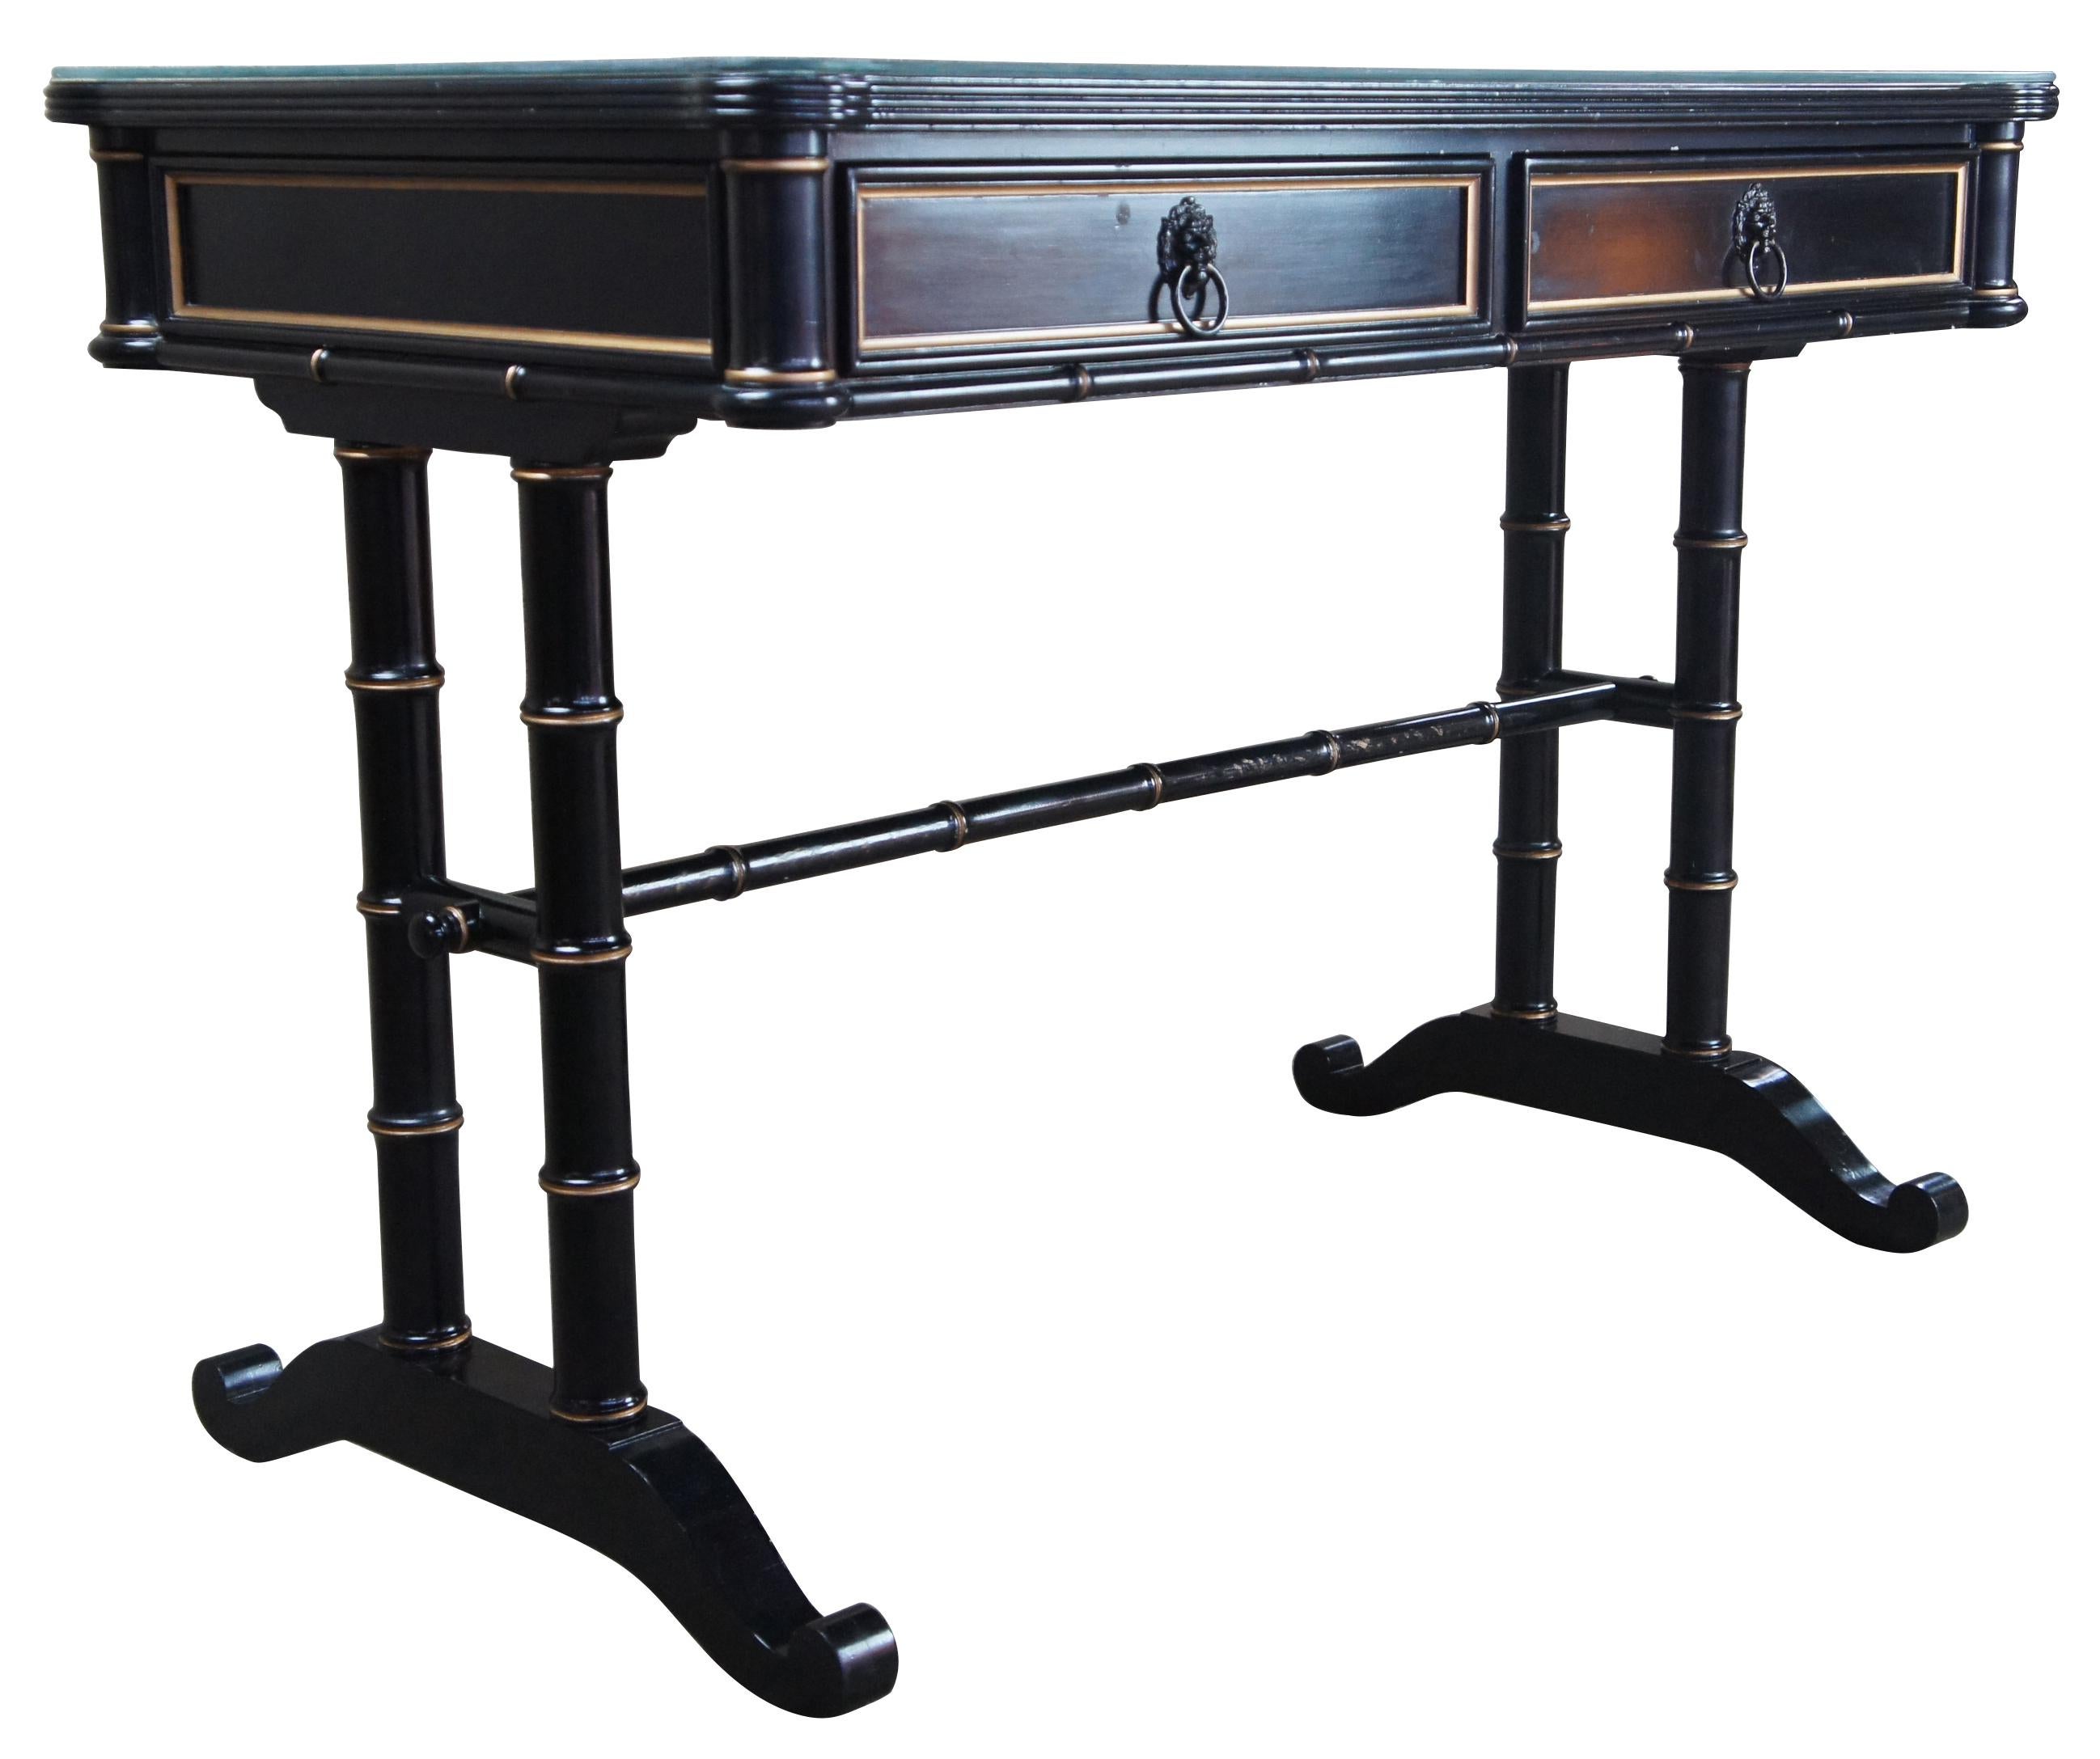 Baker Furniture black lacquer gold campaign writing desk library accent table

Baker Furniture black and gold writing desk. Features a faux bamboo styling, two drawers with lion head pulls, glass covered top.